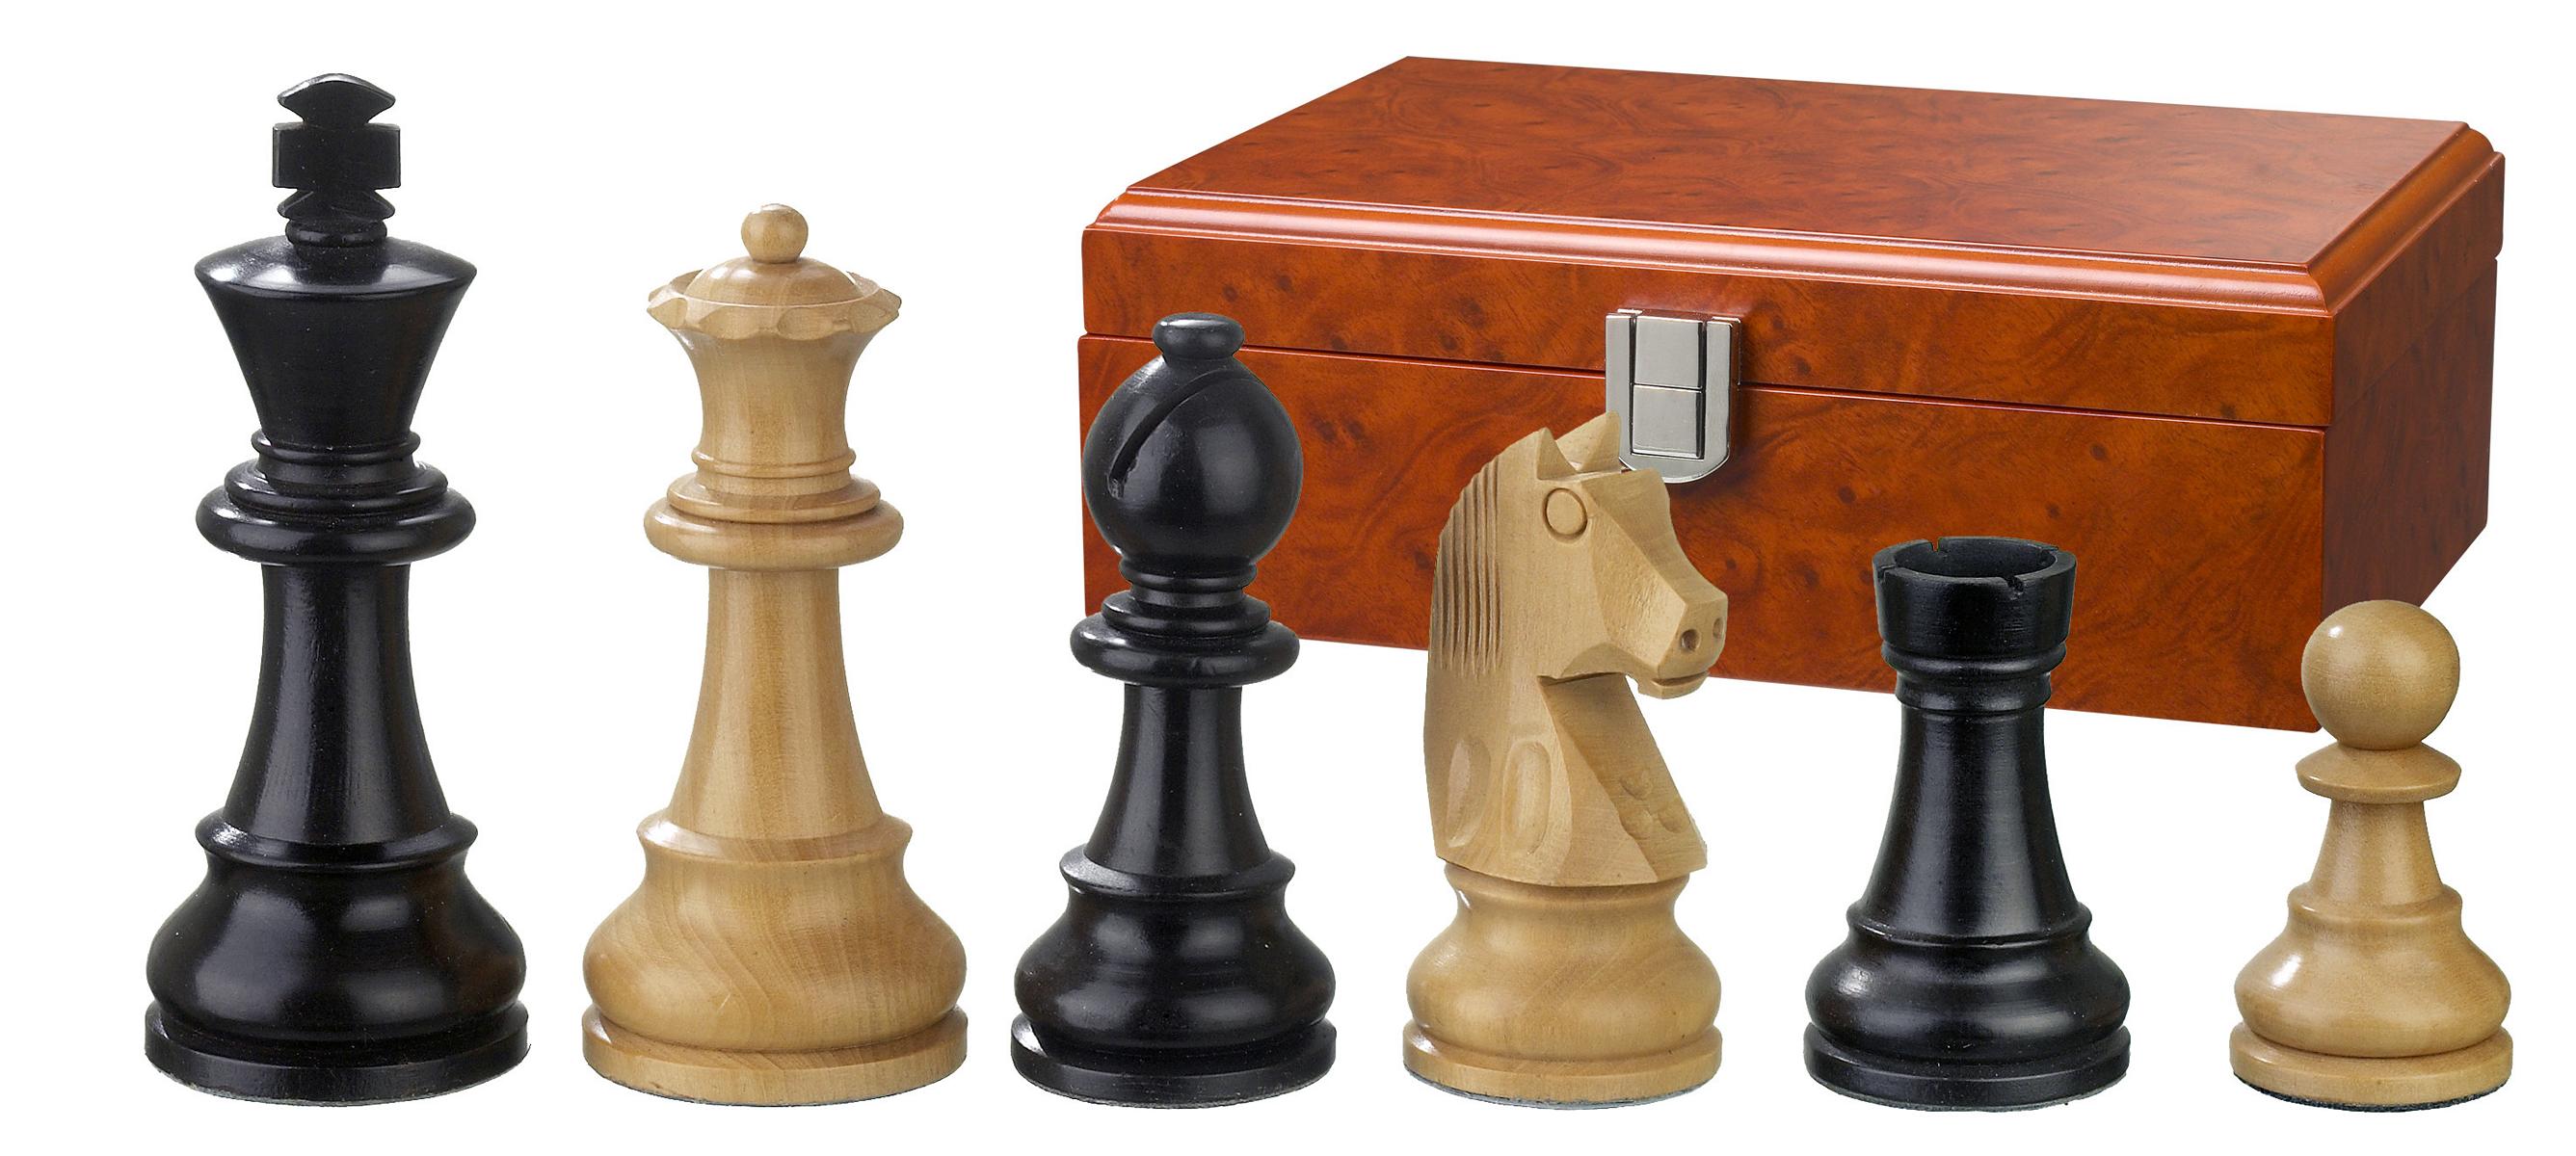 Chess pieces Ludwig XIV, king height 83 mm, in wooden box